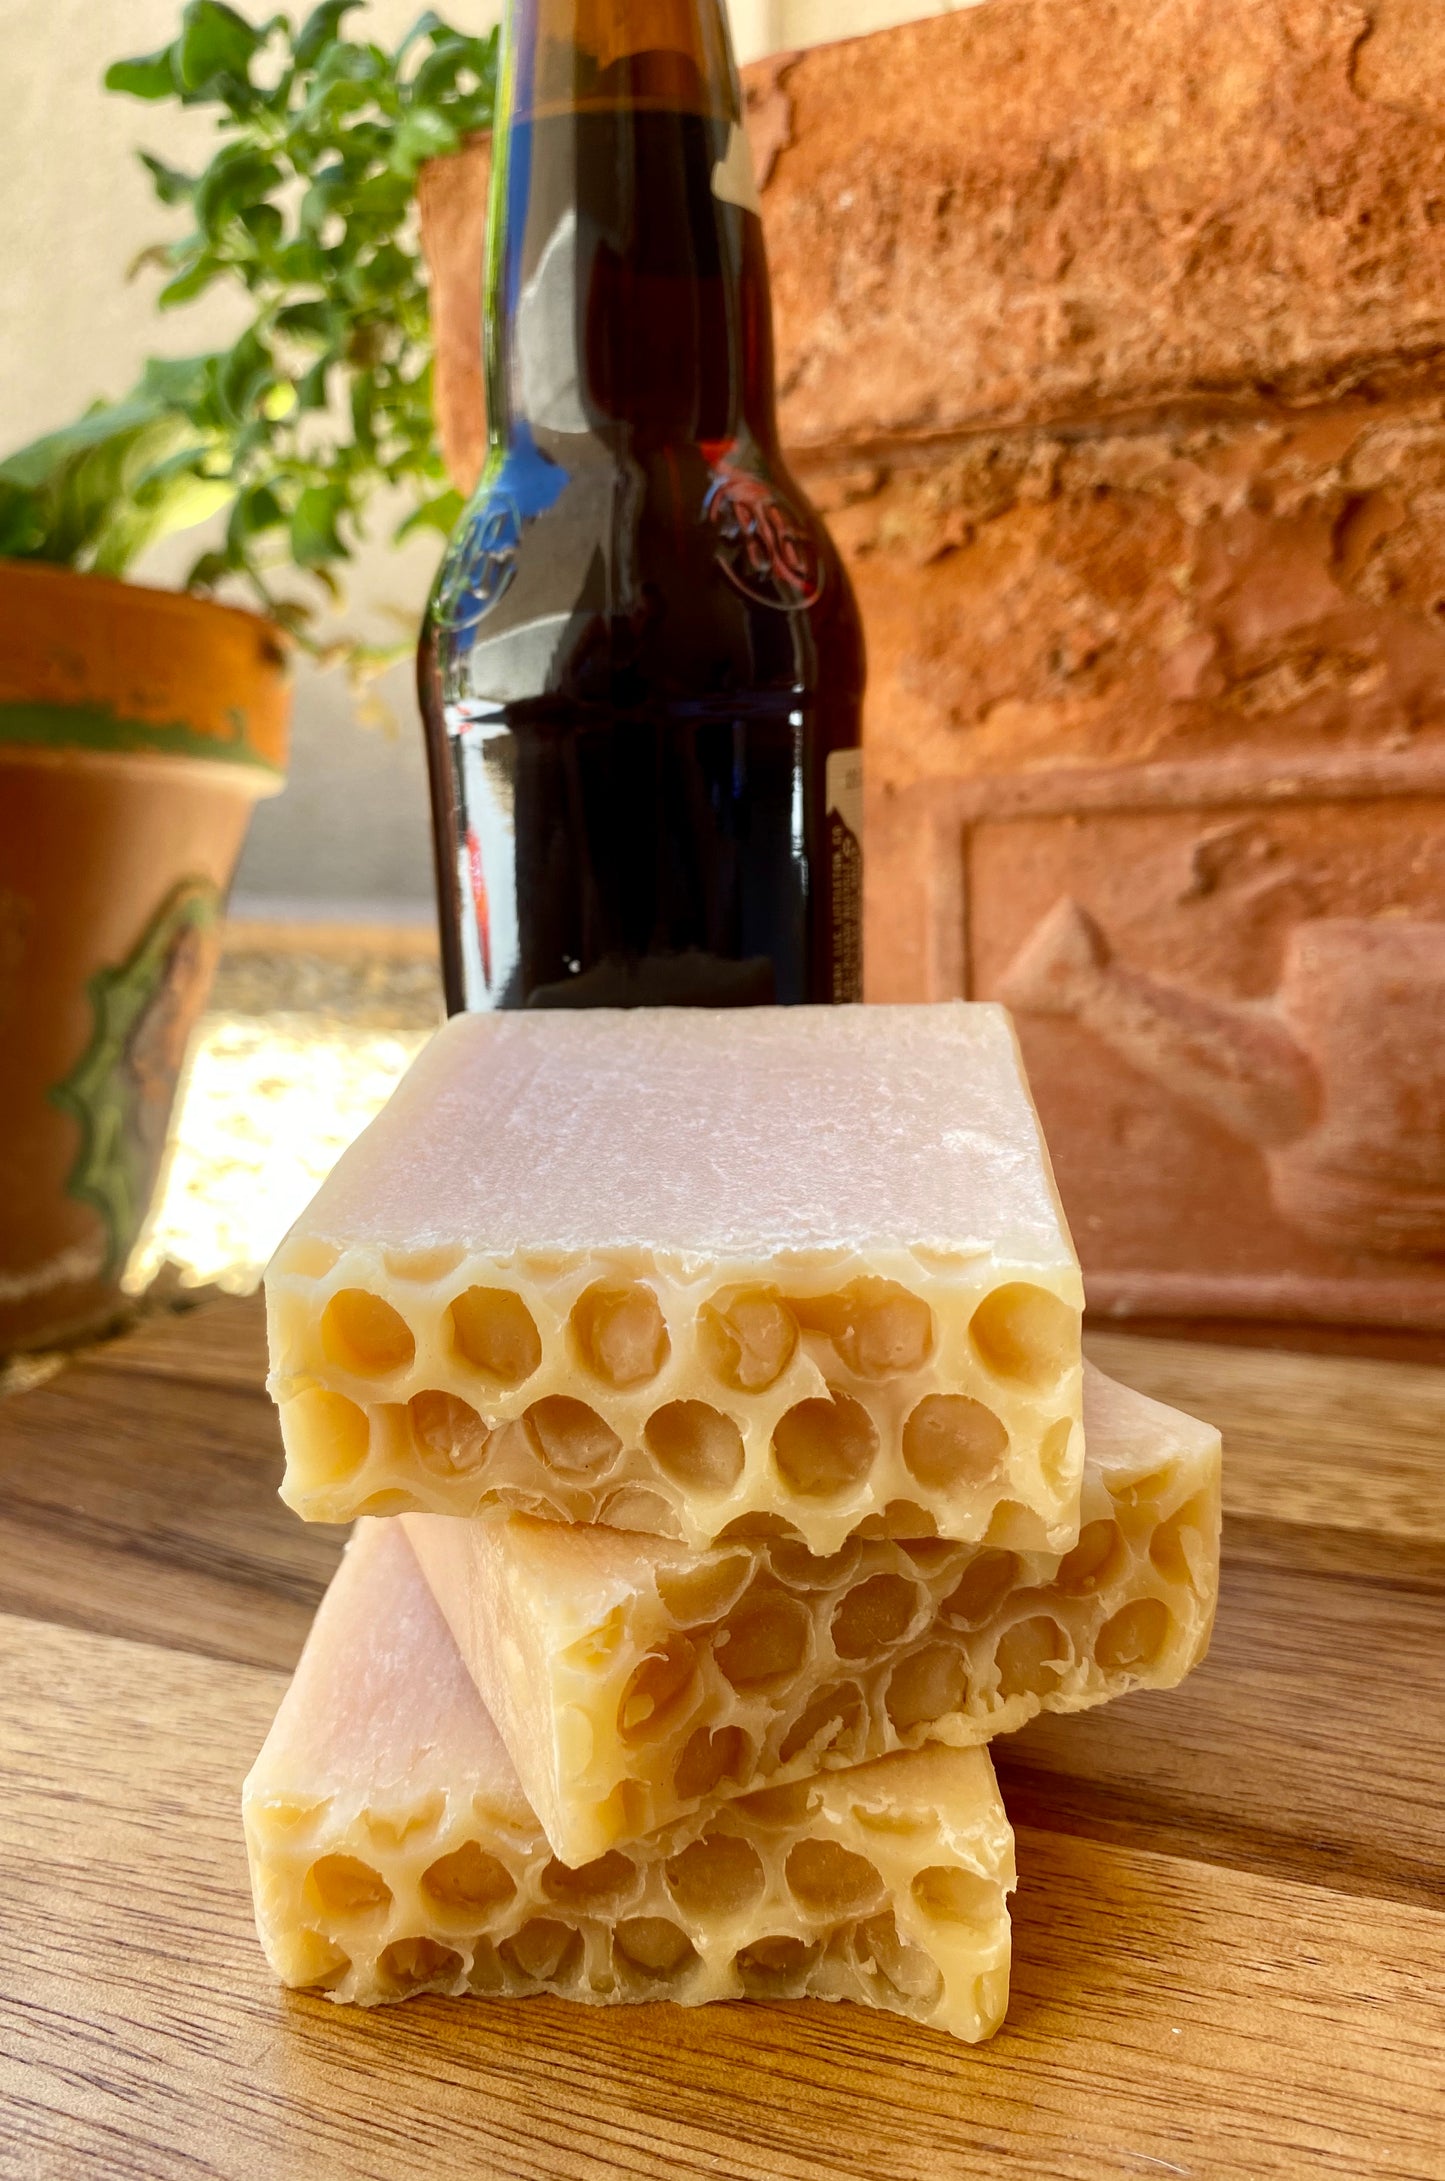 This Suds For You Beer Soap